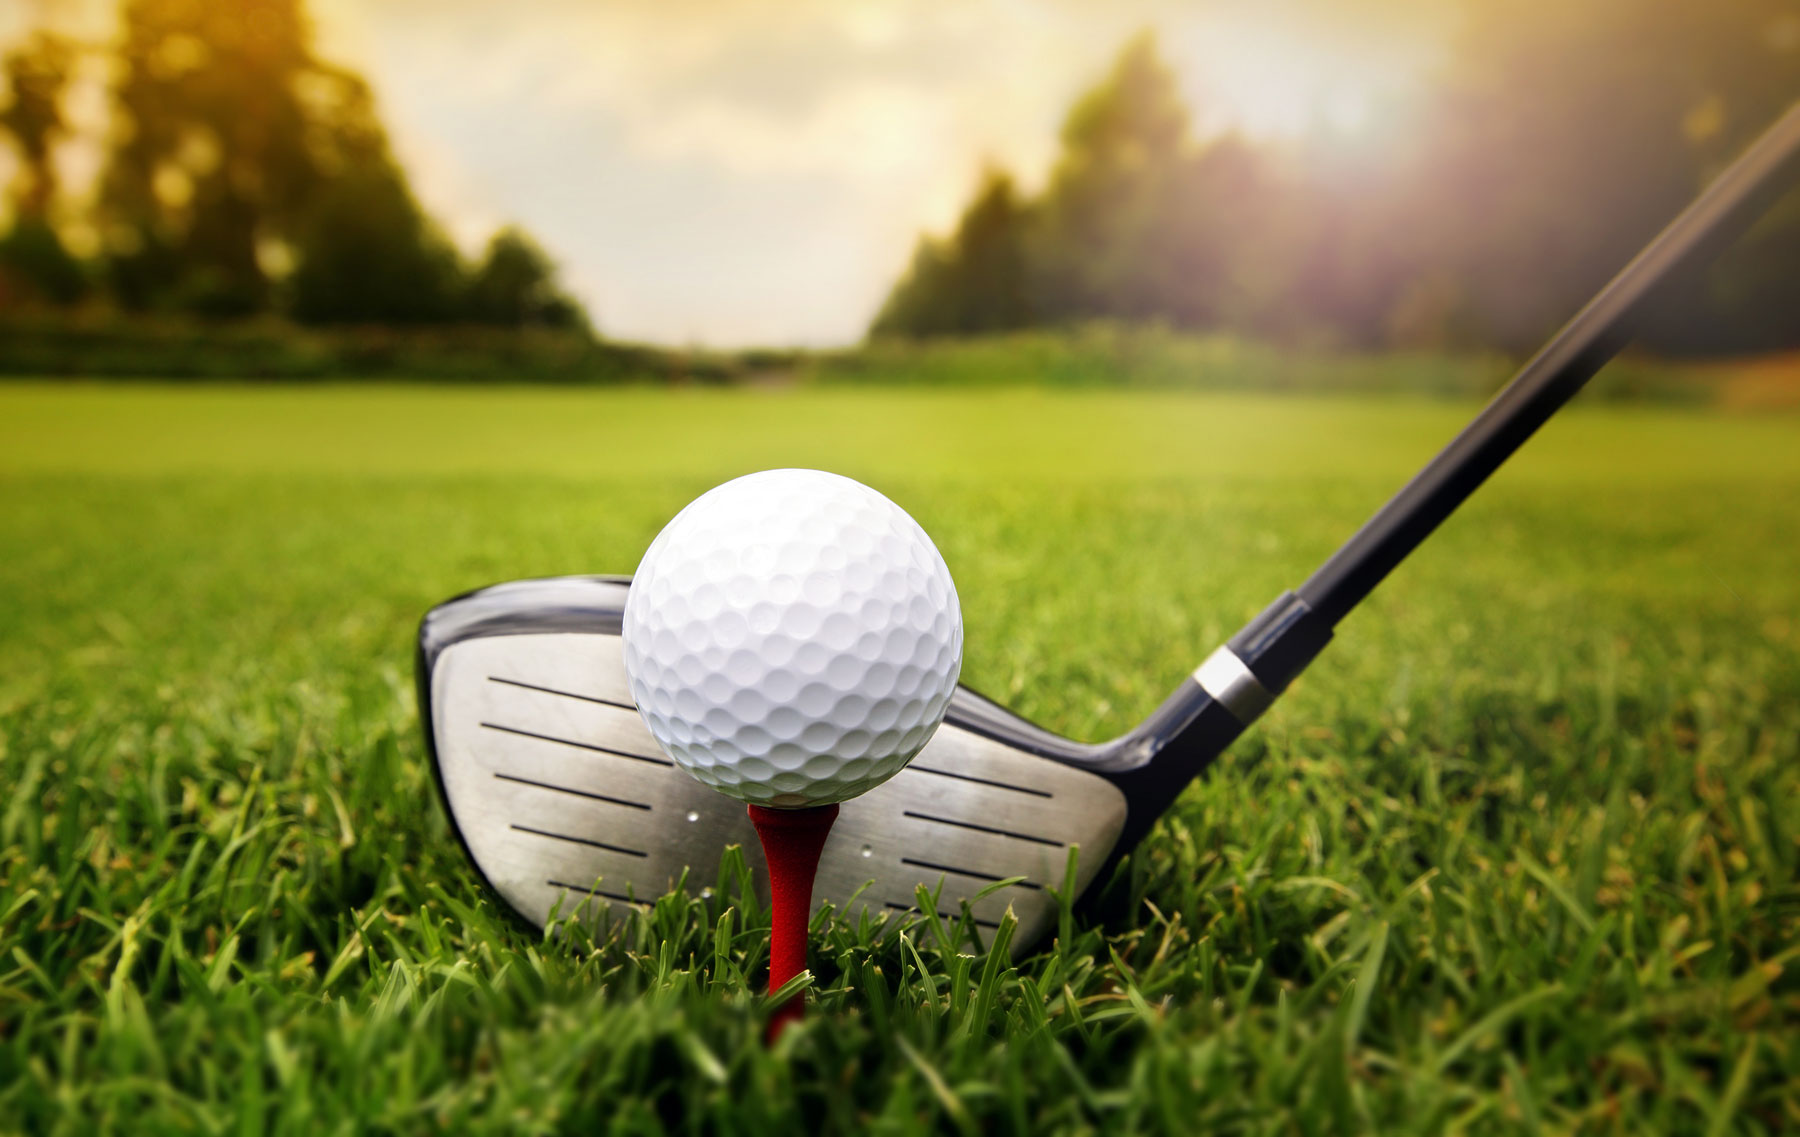 WV CARING HOLDS 30TH ANNUAL DR. D.R. DAVIS GOLF CLASSIC